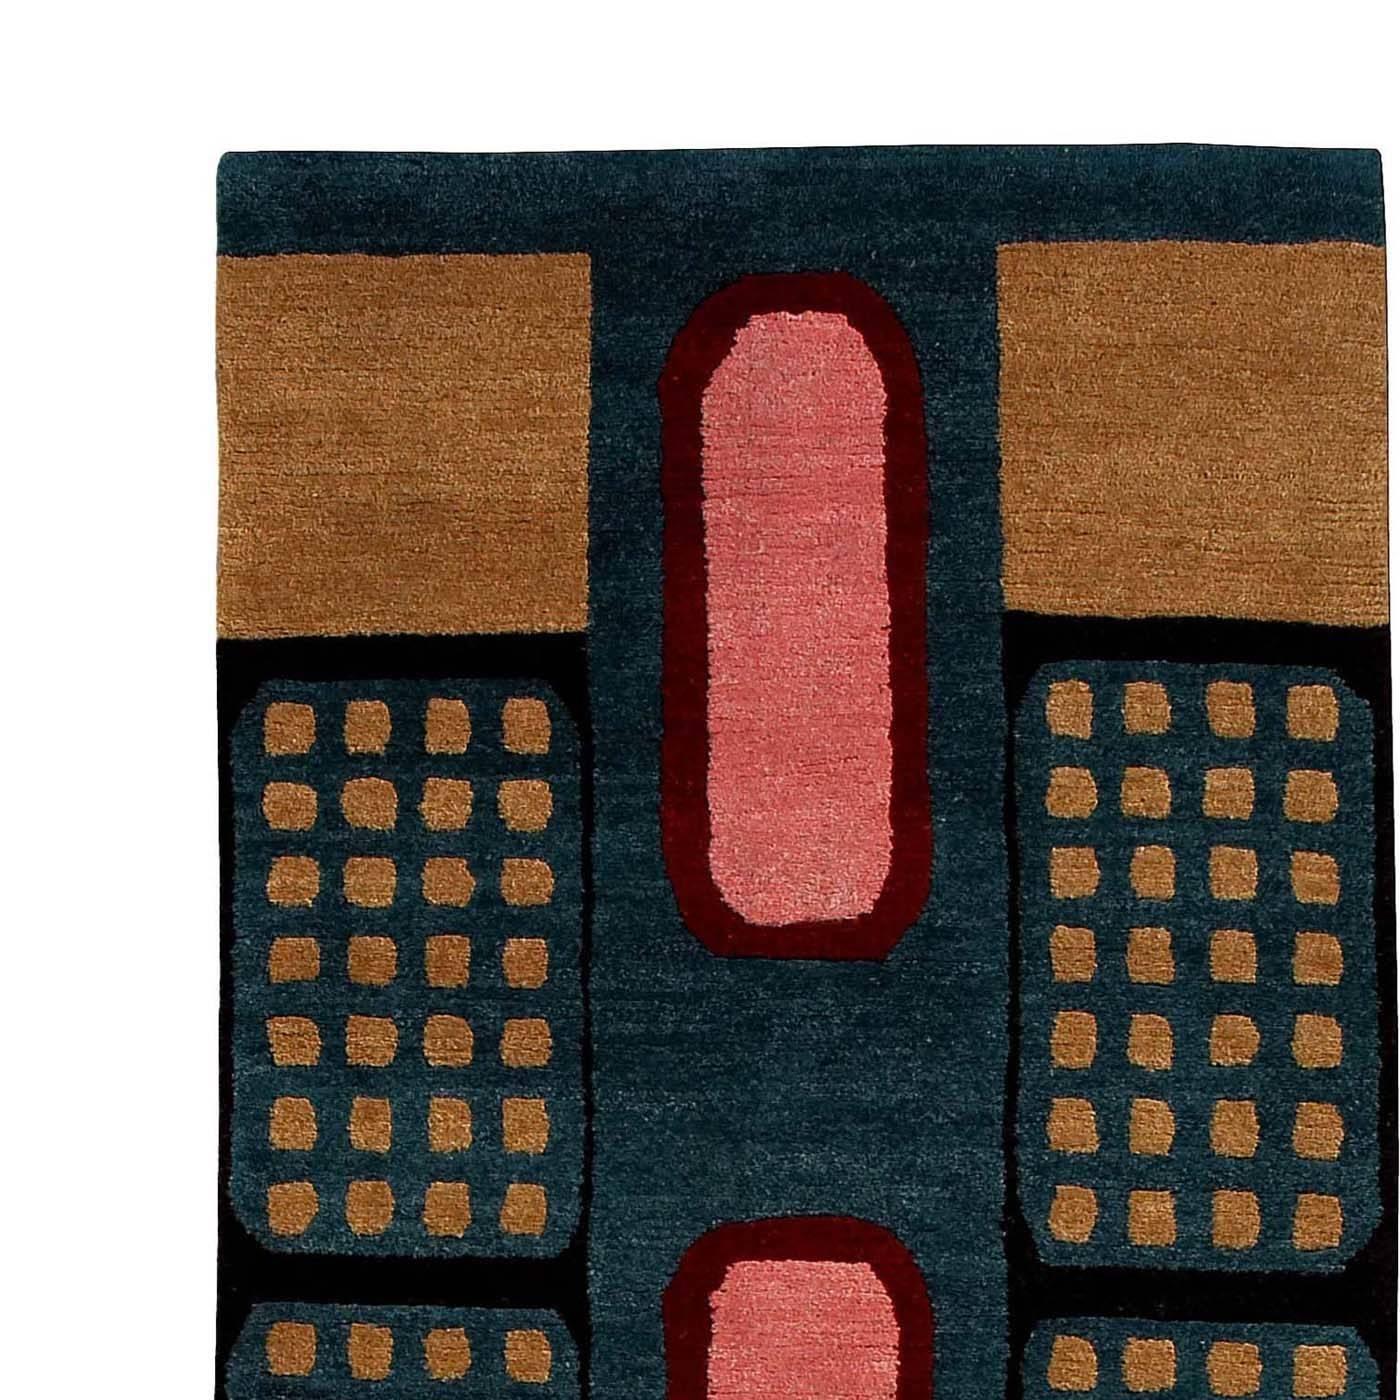 This unique carpet features vivid warm colors and a bold design by Nathalie du Pasquier, who also signed it. Part of a 36-piece series, this one-of-a-kind rug was entirely made by hand by expert artisans in Nepal who prepared the wool using